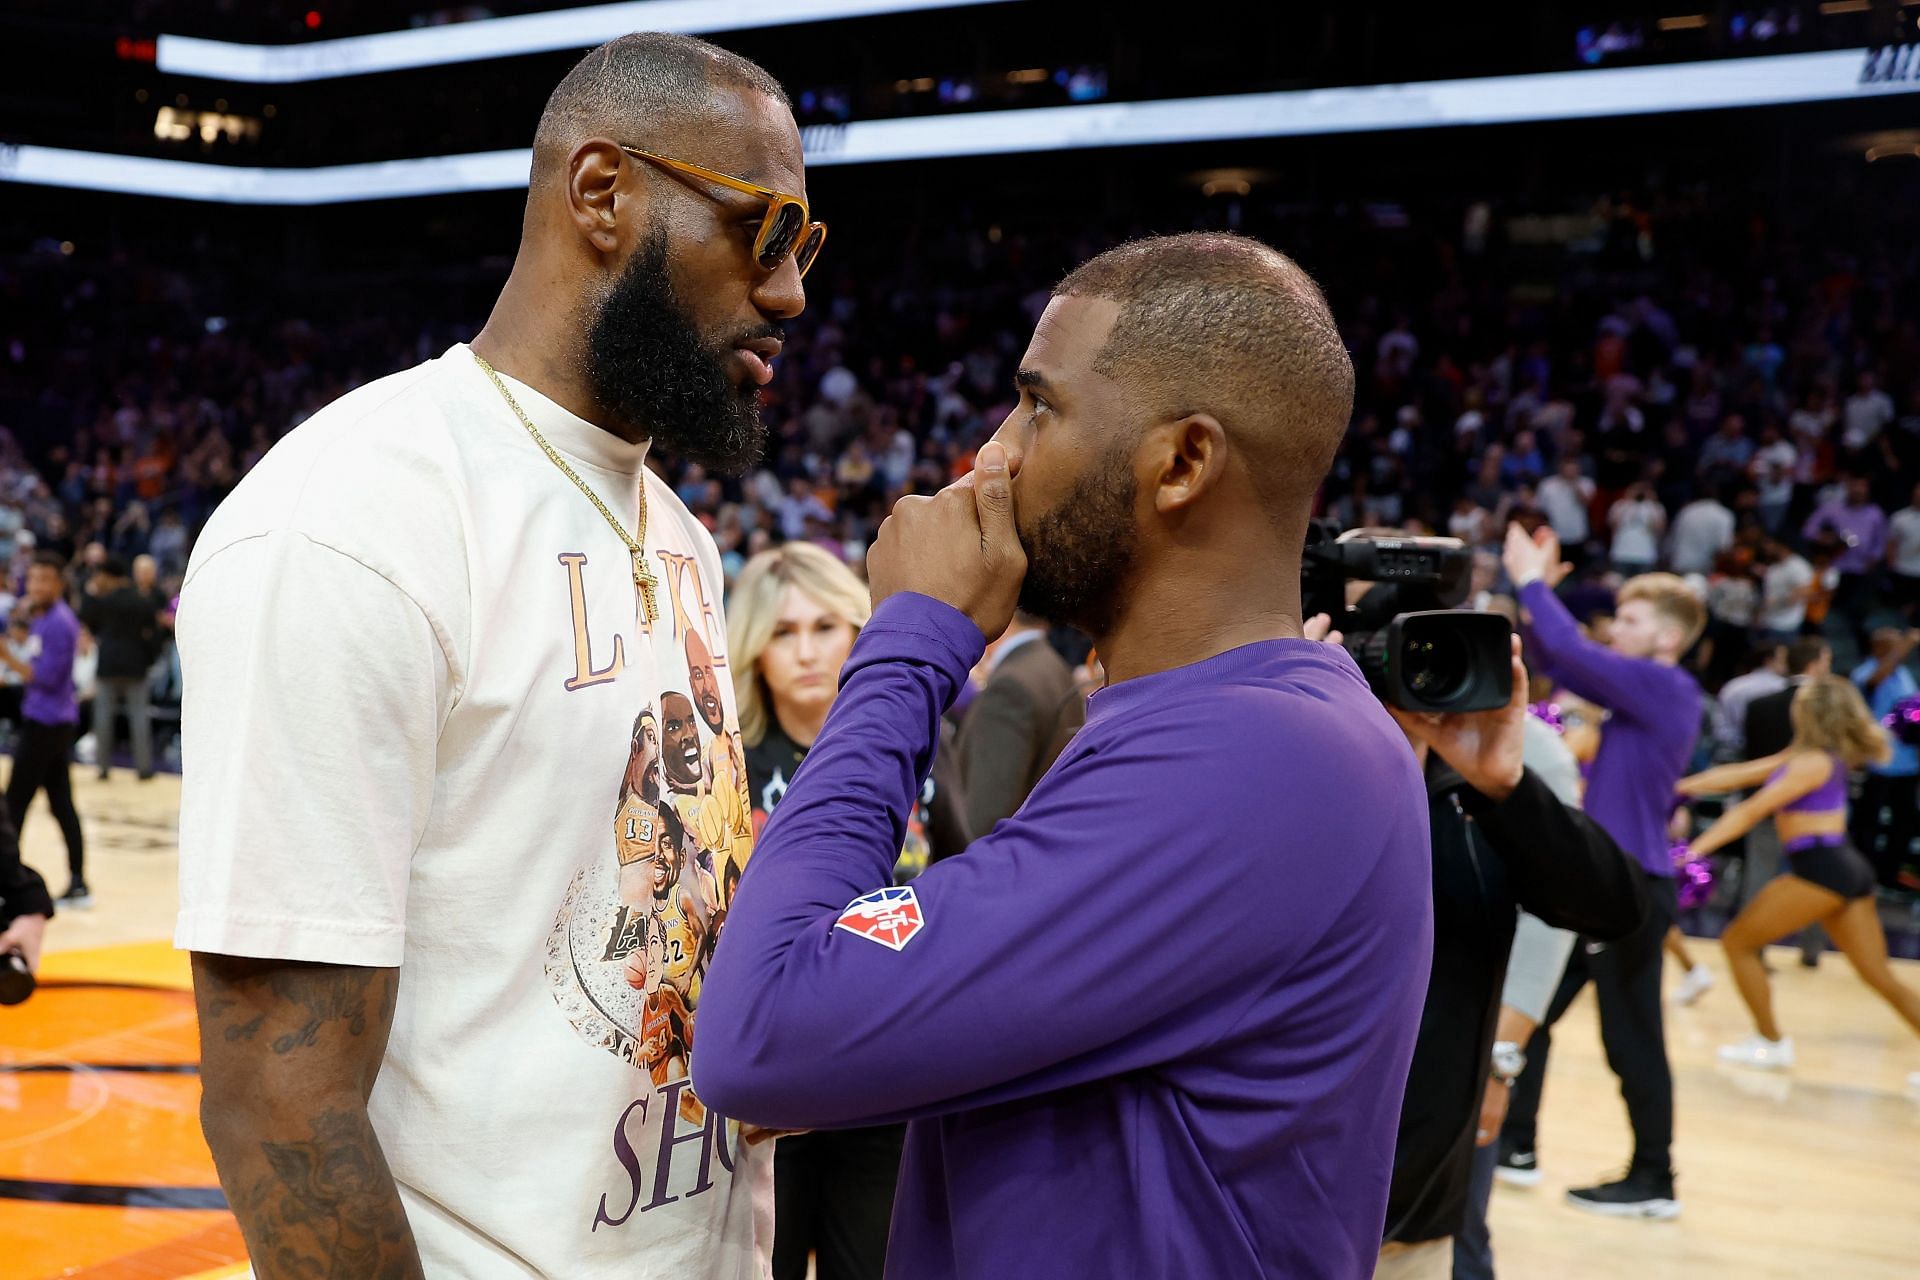 LeBron James of the Los Angeles Lakers talks with Chris Paul of the Phoenix Suns.